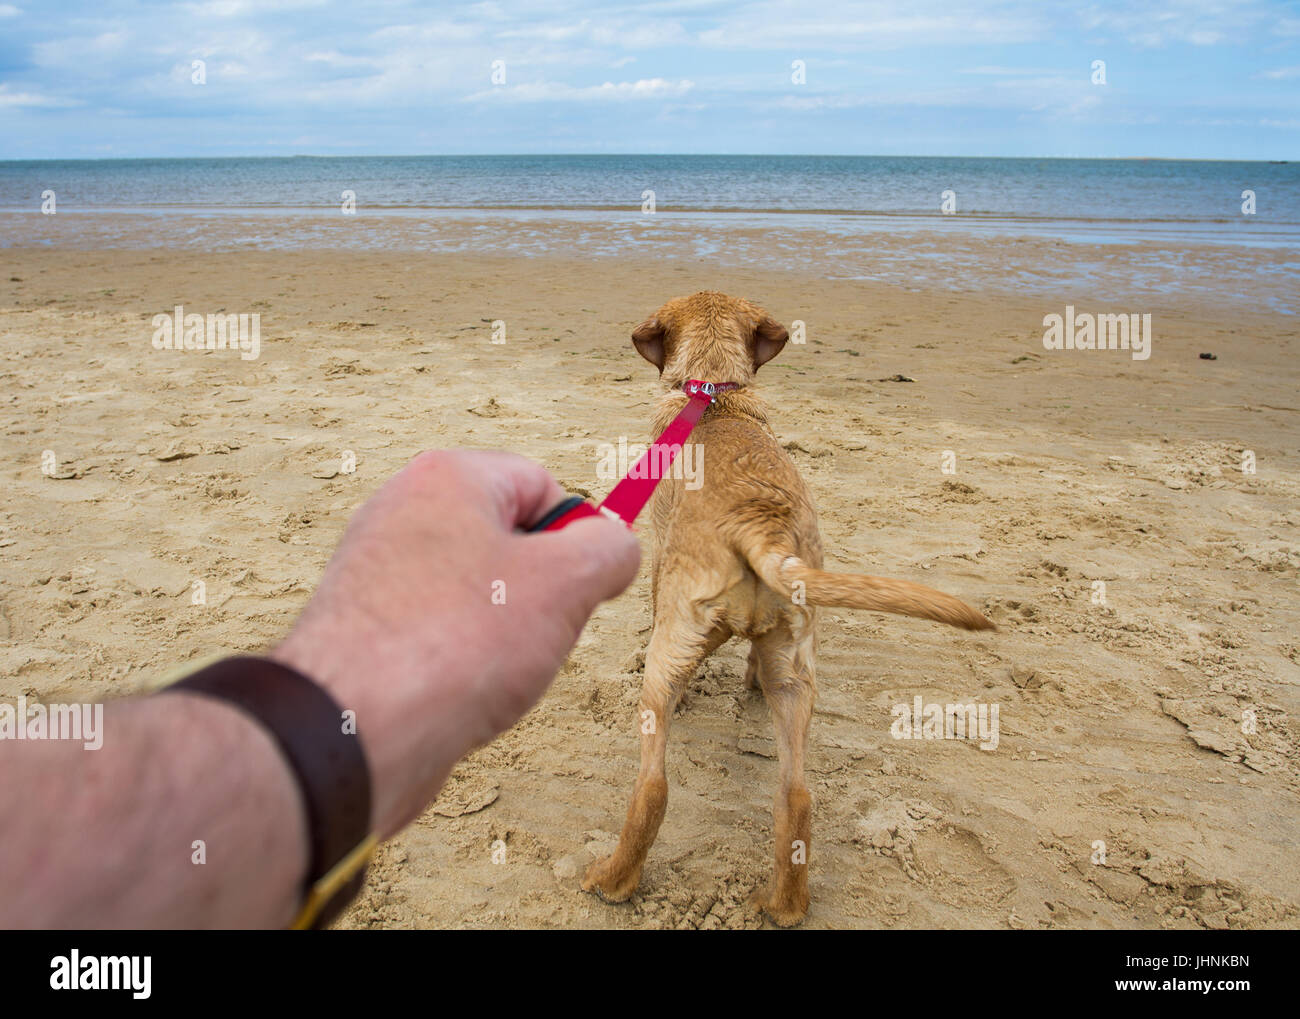 A point of view image of a yellow Labrador retriever dog pulling hard on its leash at a beach and pulling its owner towards the sea. Stock Photo